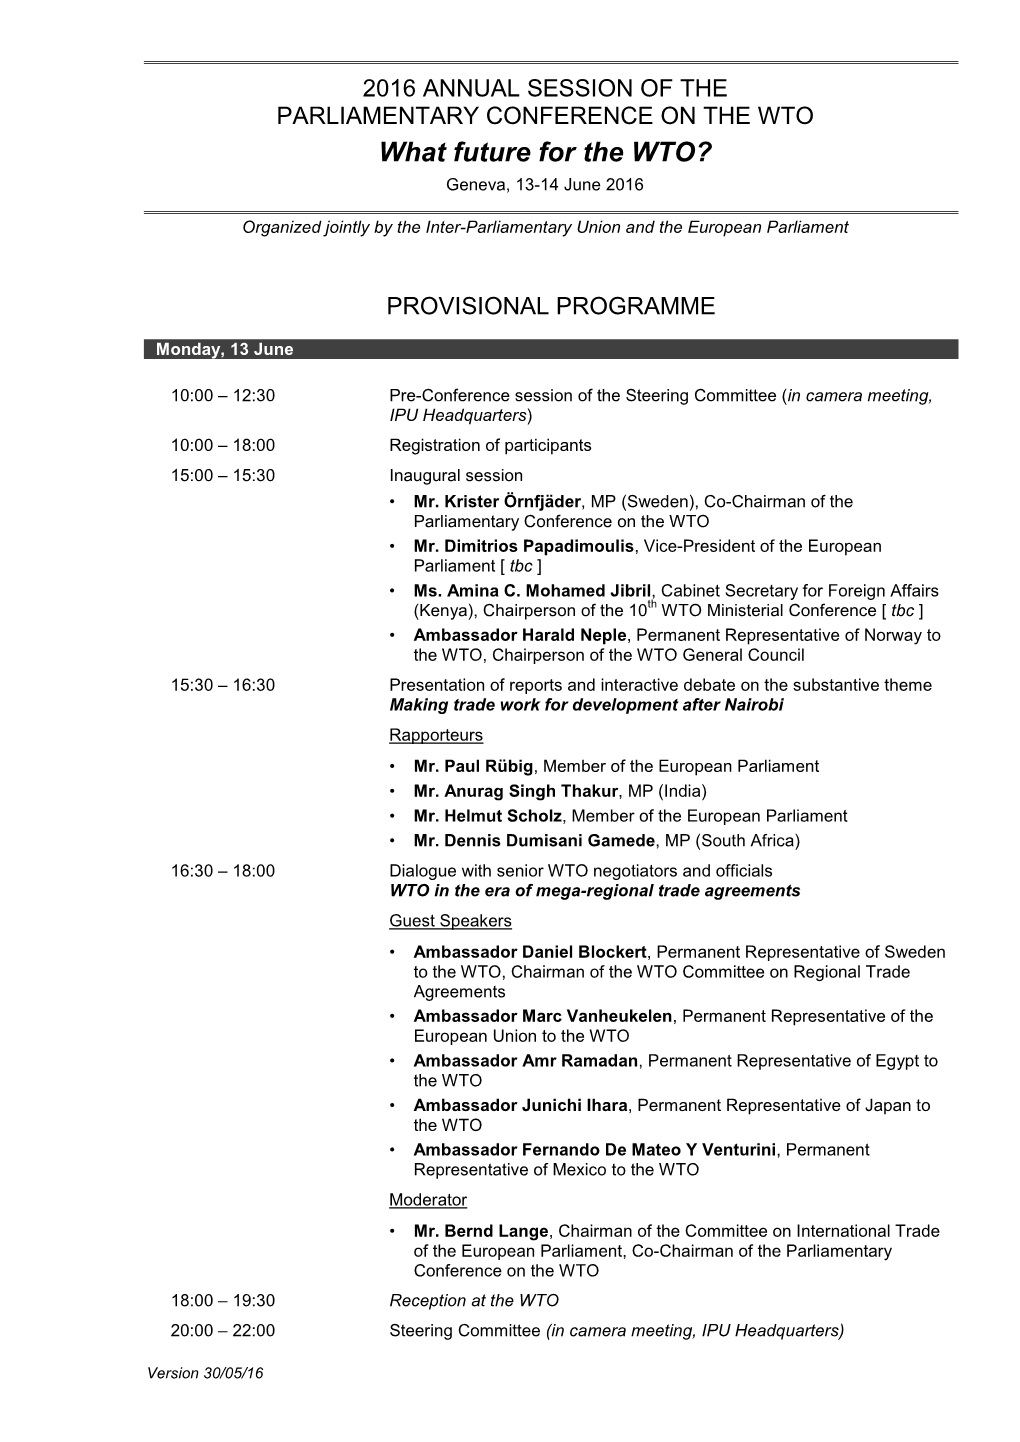 Provisional Programme of the Meeting